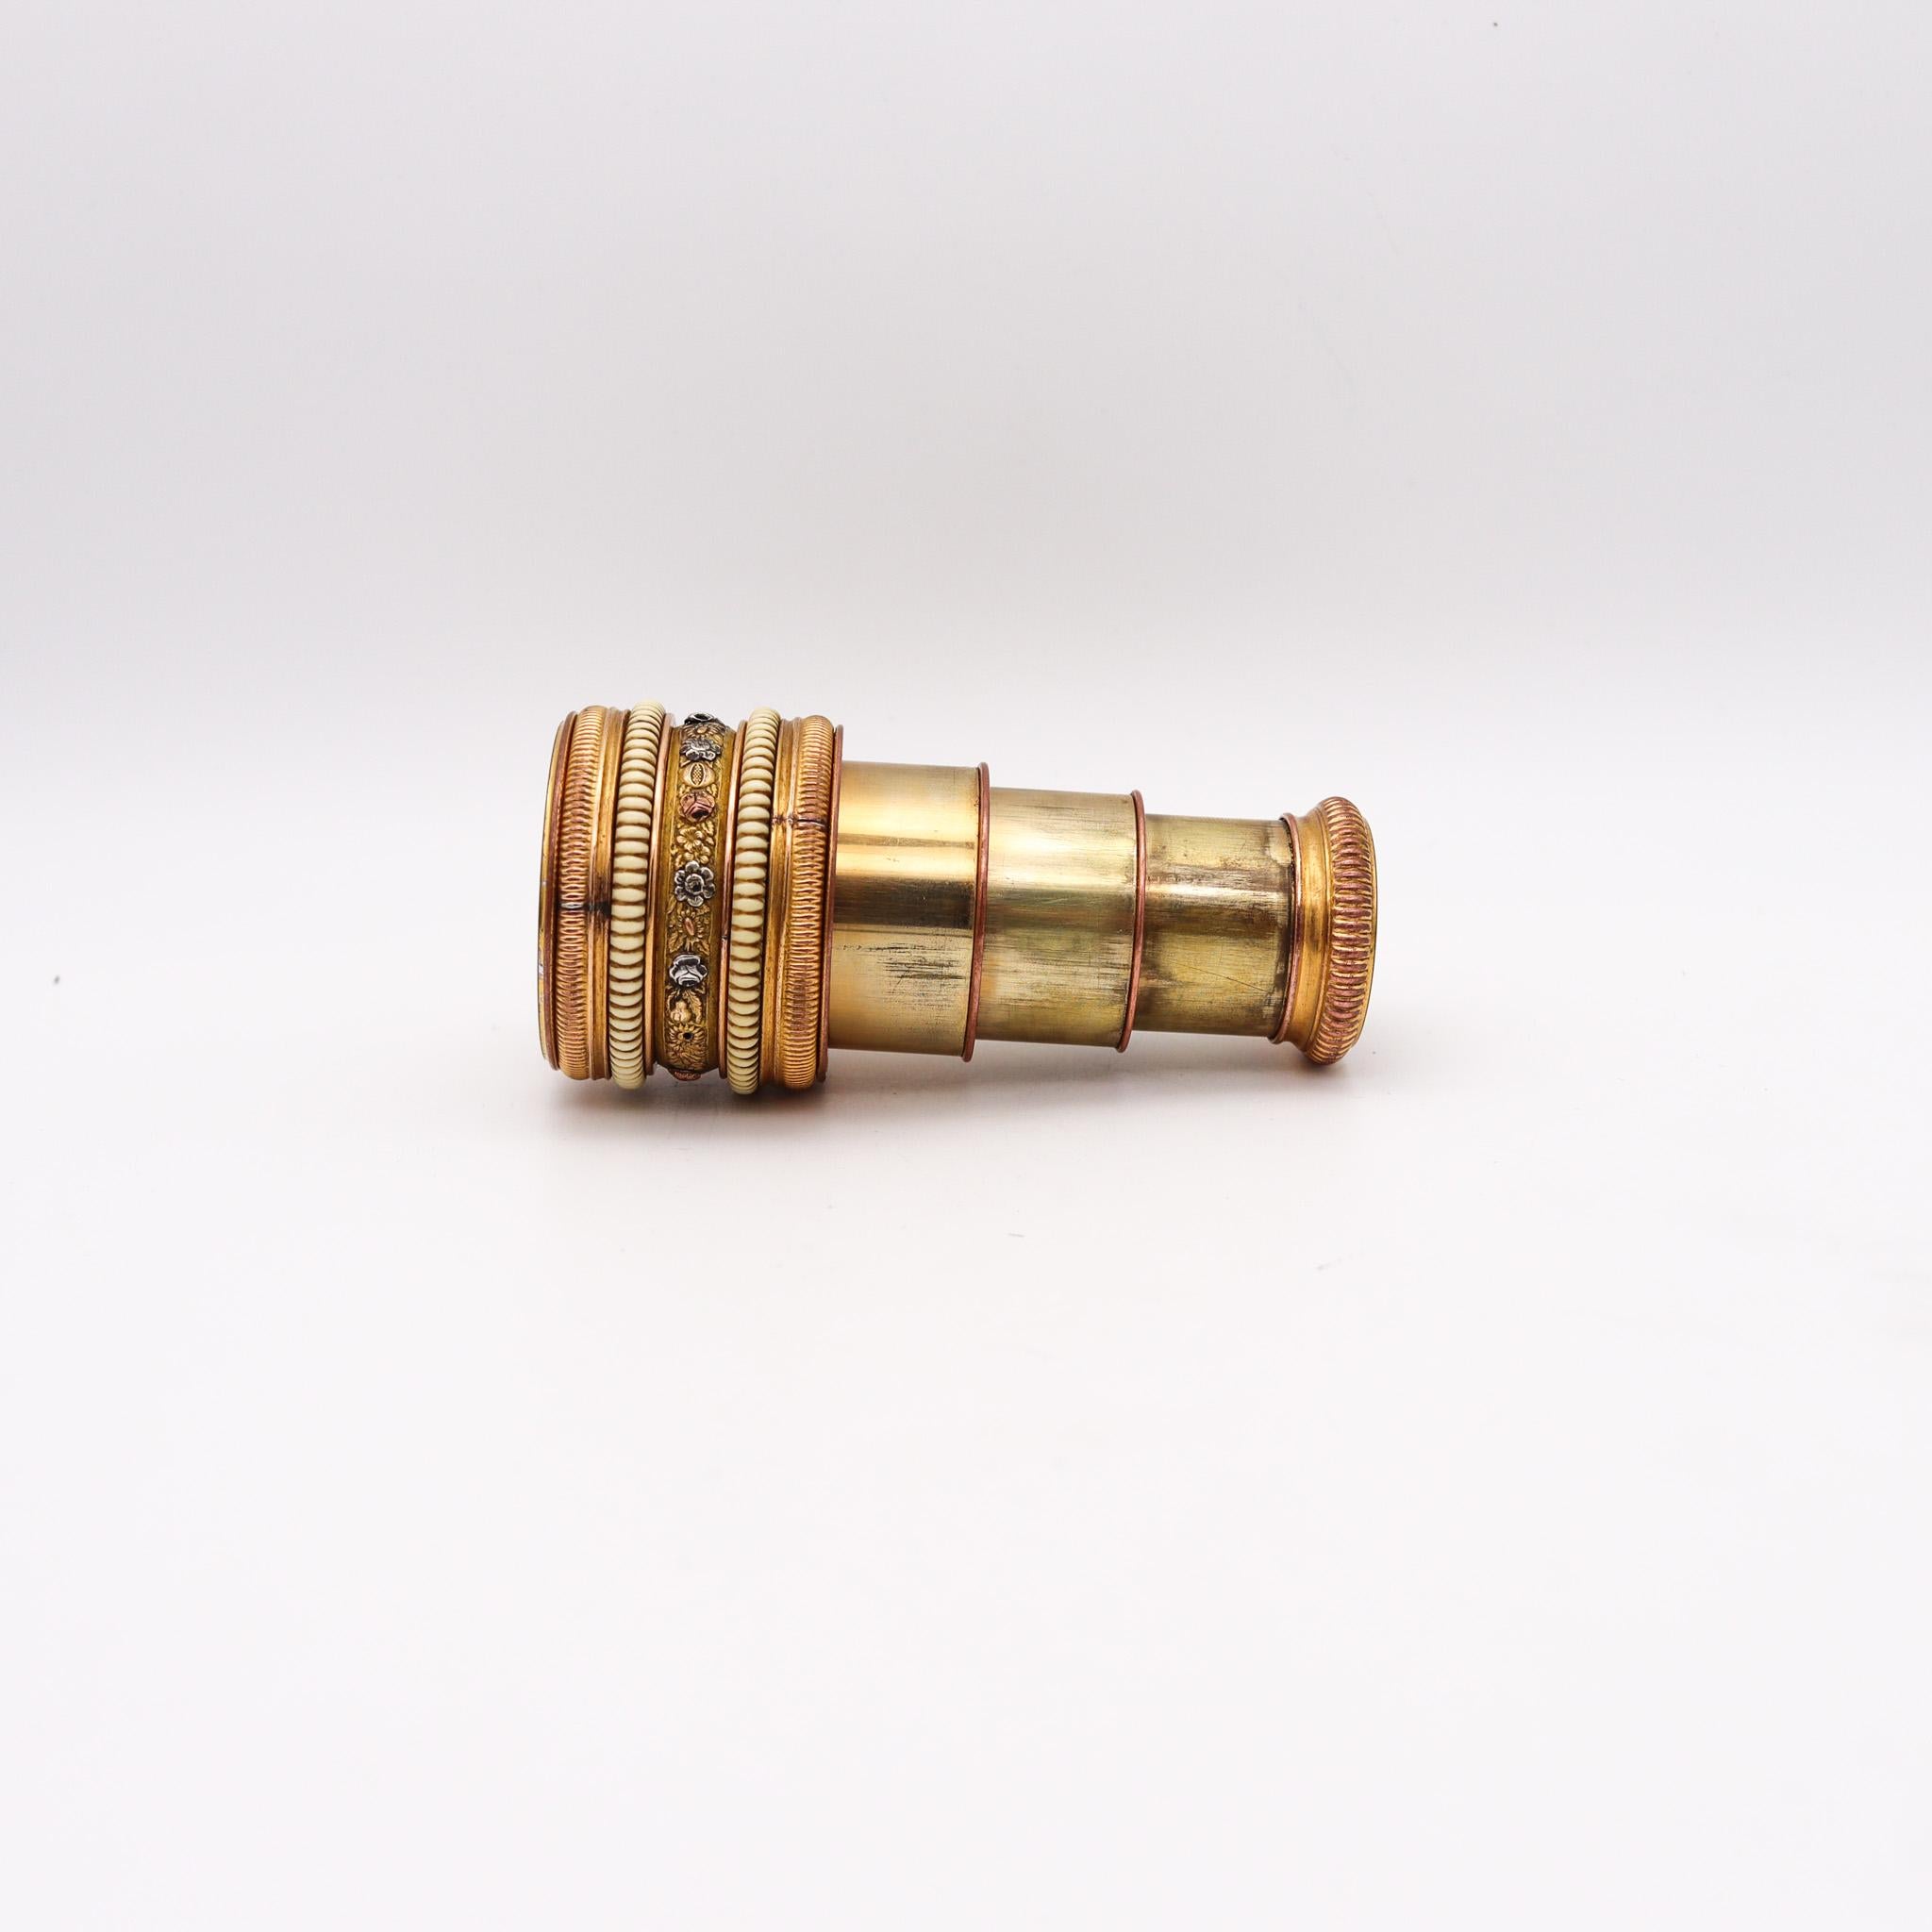 French three-Draws Monocular Telescope.

Very unusual and handy monocular telescope, created in France during the last three-quarters of the 19th century, circa 1880. This is a personal pocket luxury monocular telescope, crafted in solid gilt bronze